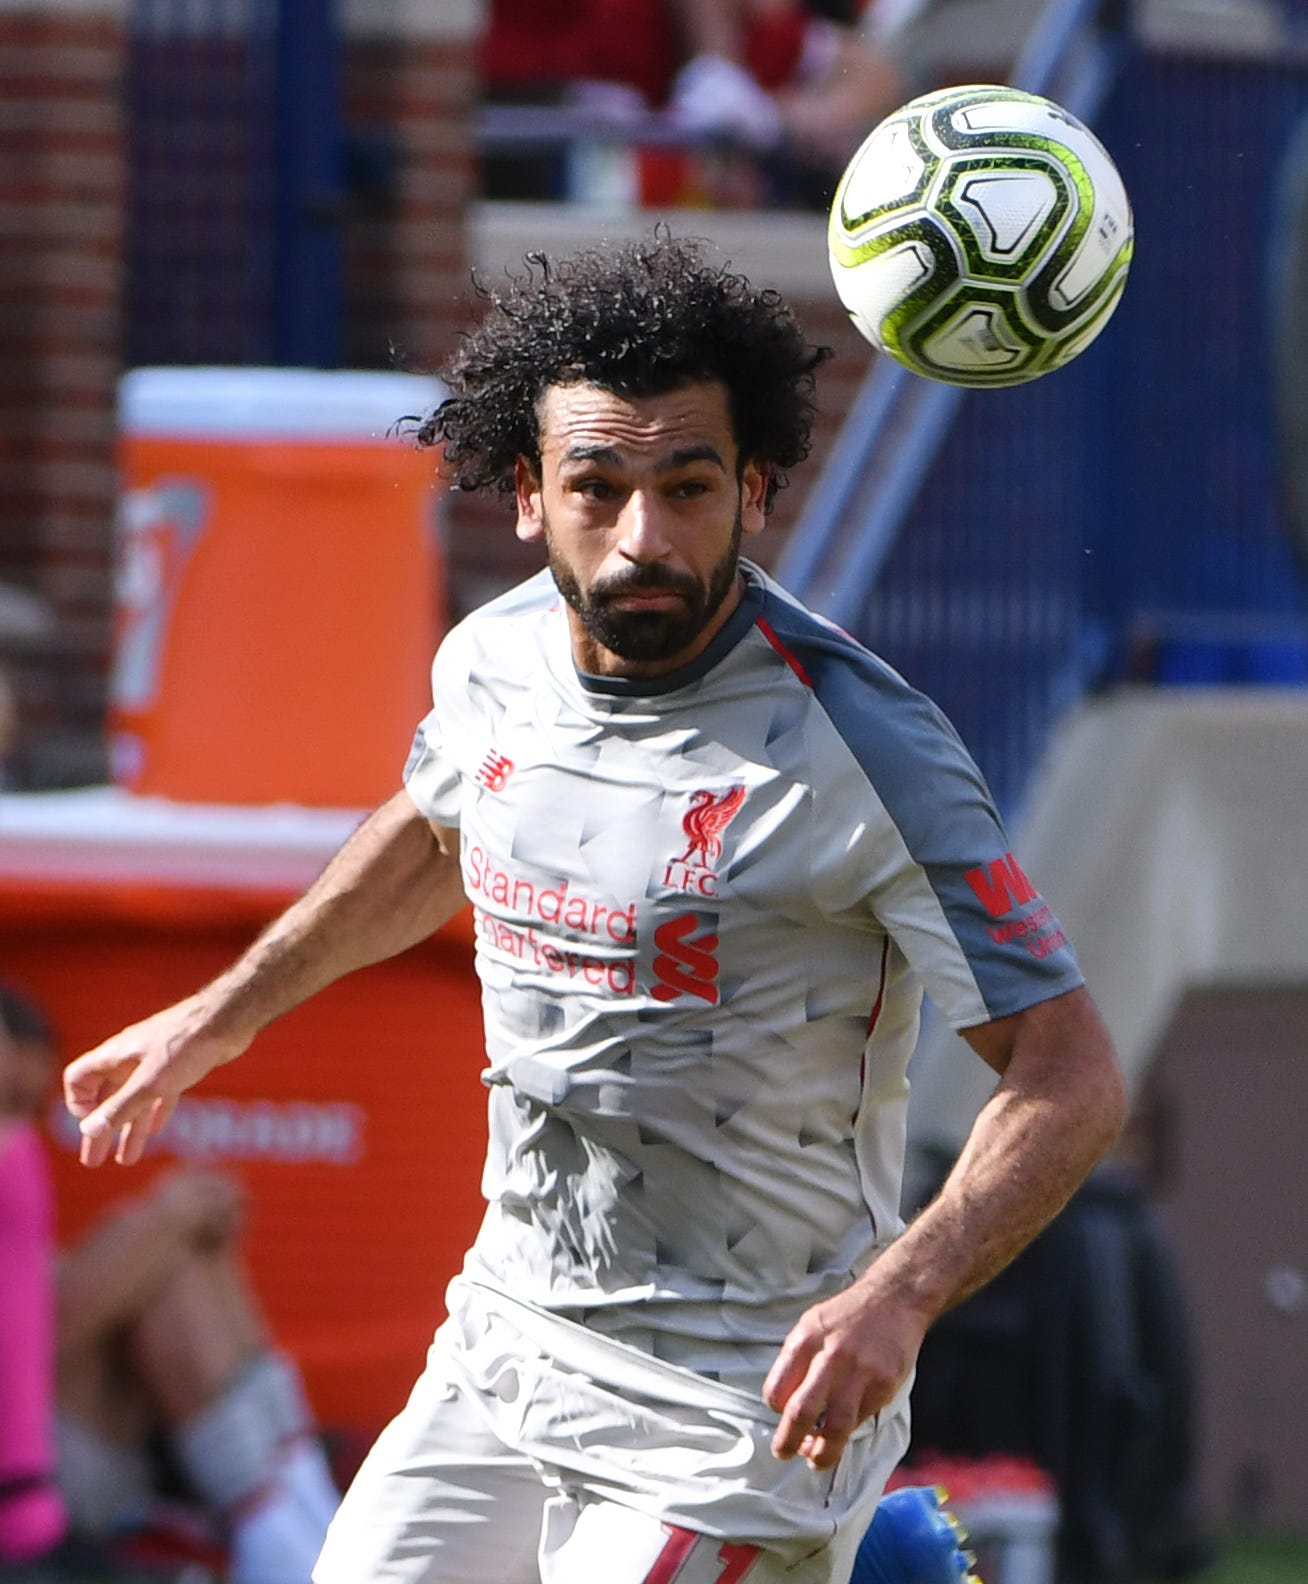 Liverpool's Mohamed Salah keeps an eye on the ball bringing it up field in the first half.